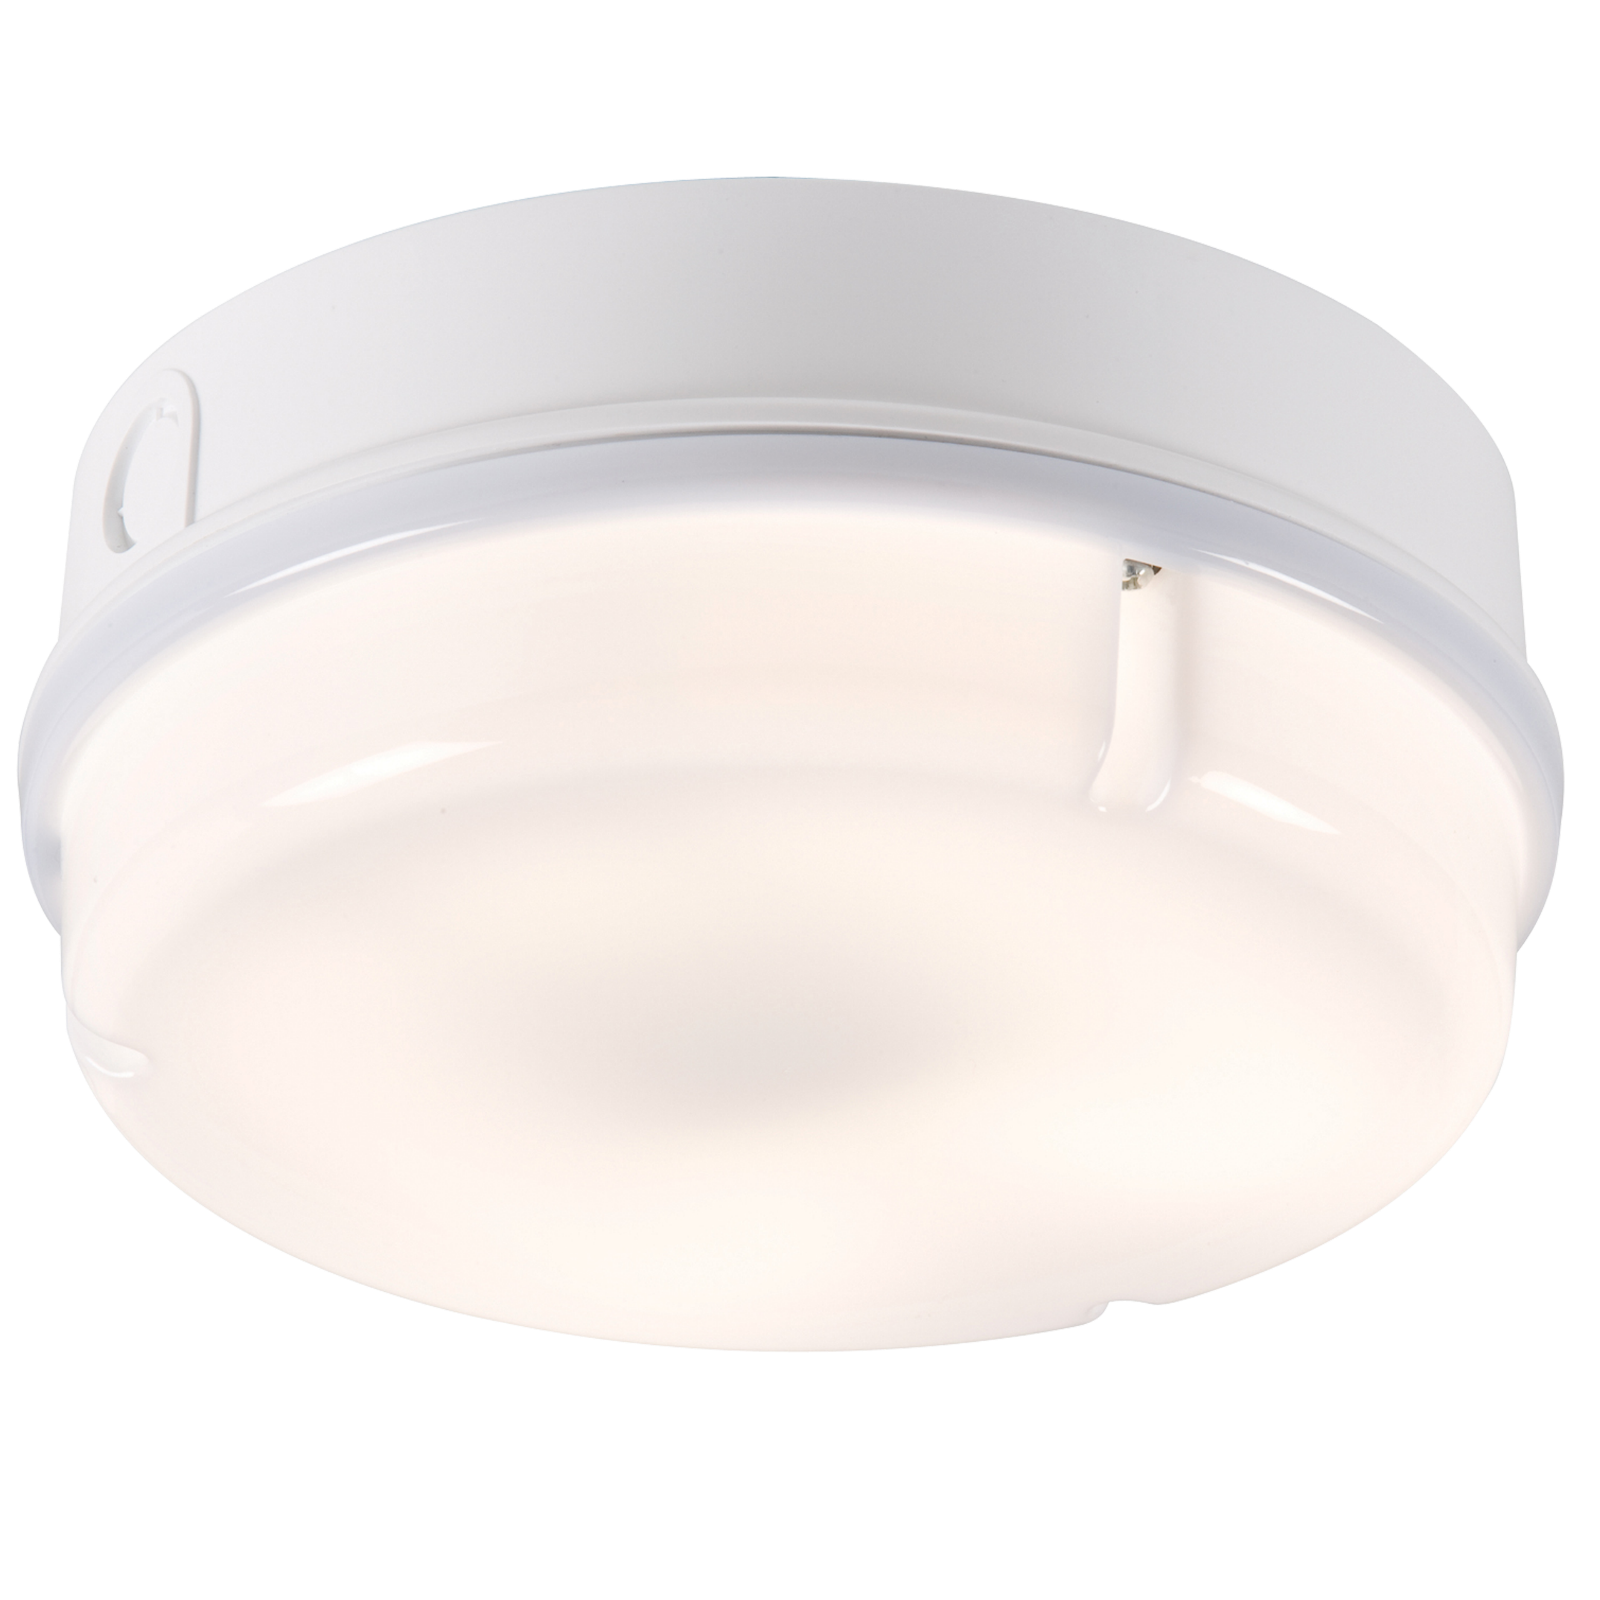 IP65 28W HF Round Bulkhead With Opal Diffuser And White Base - TPR28WOHF 